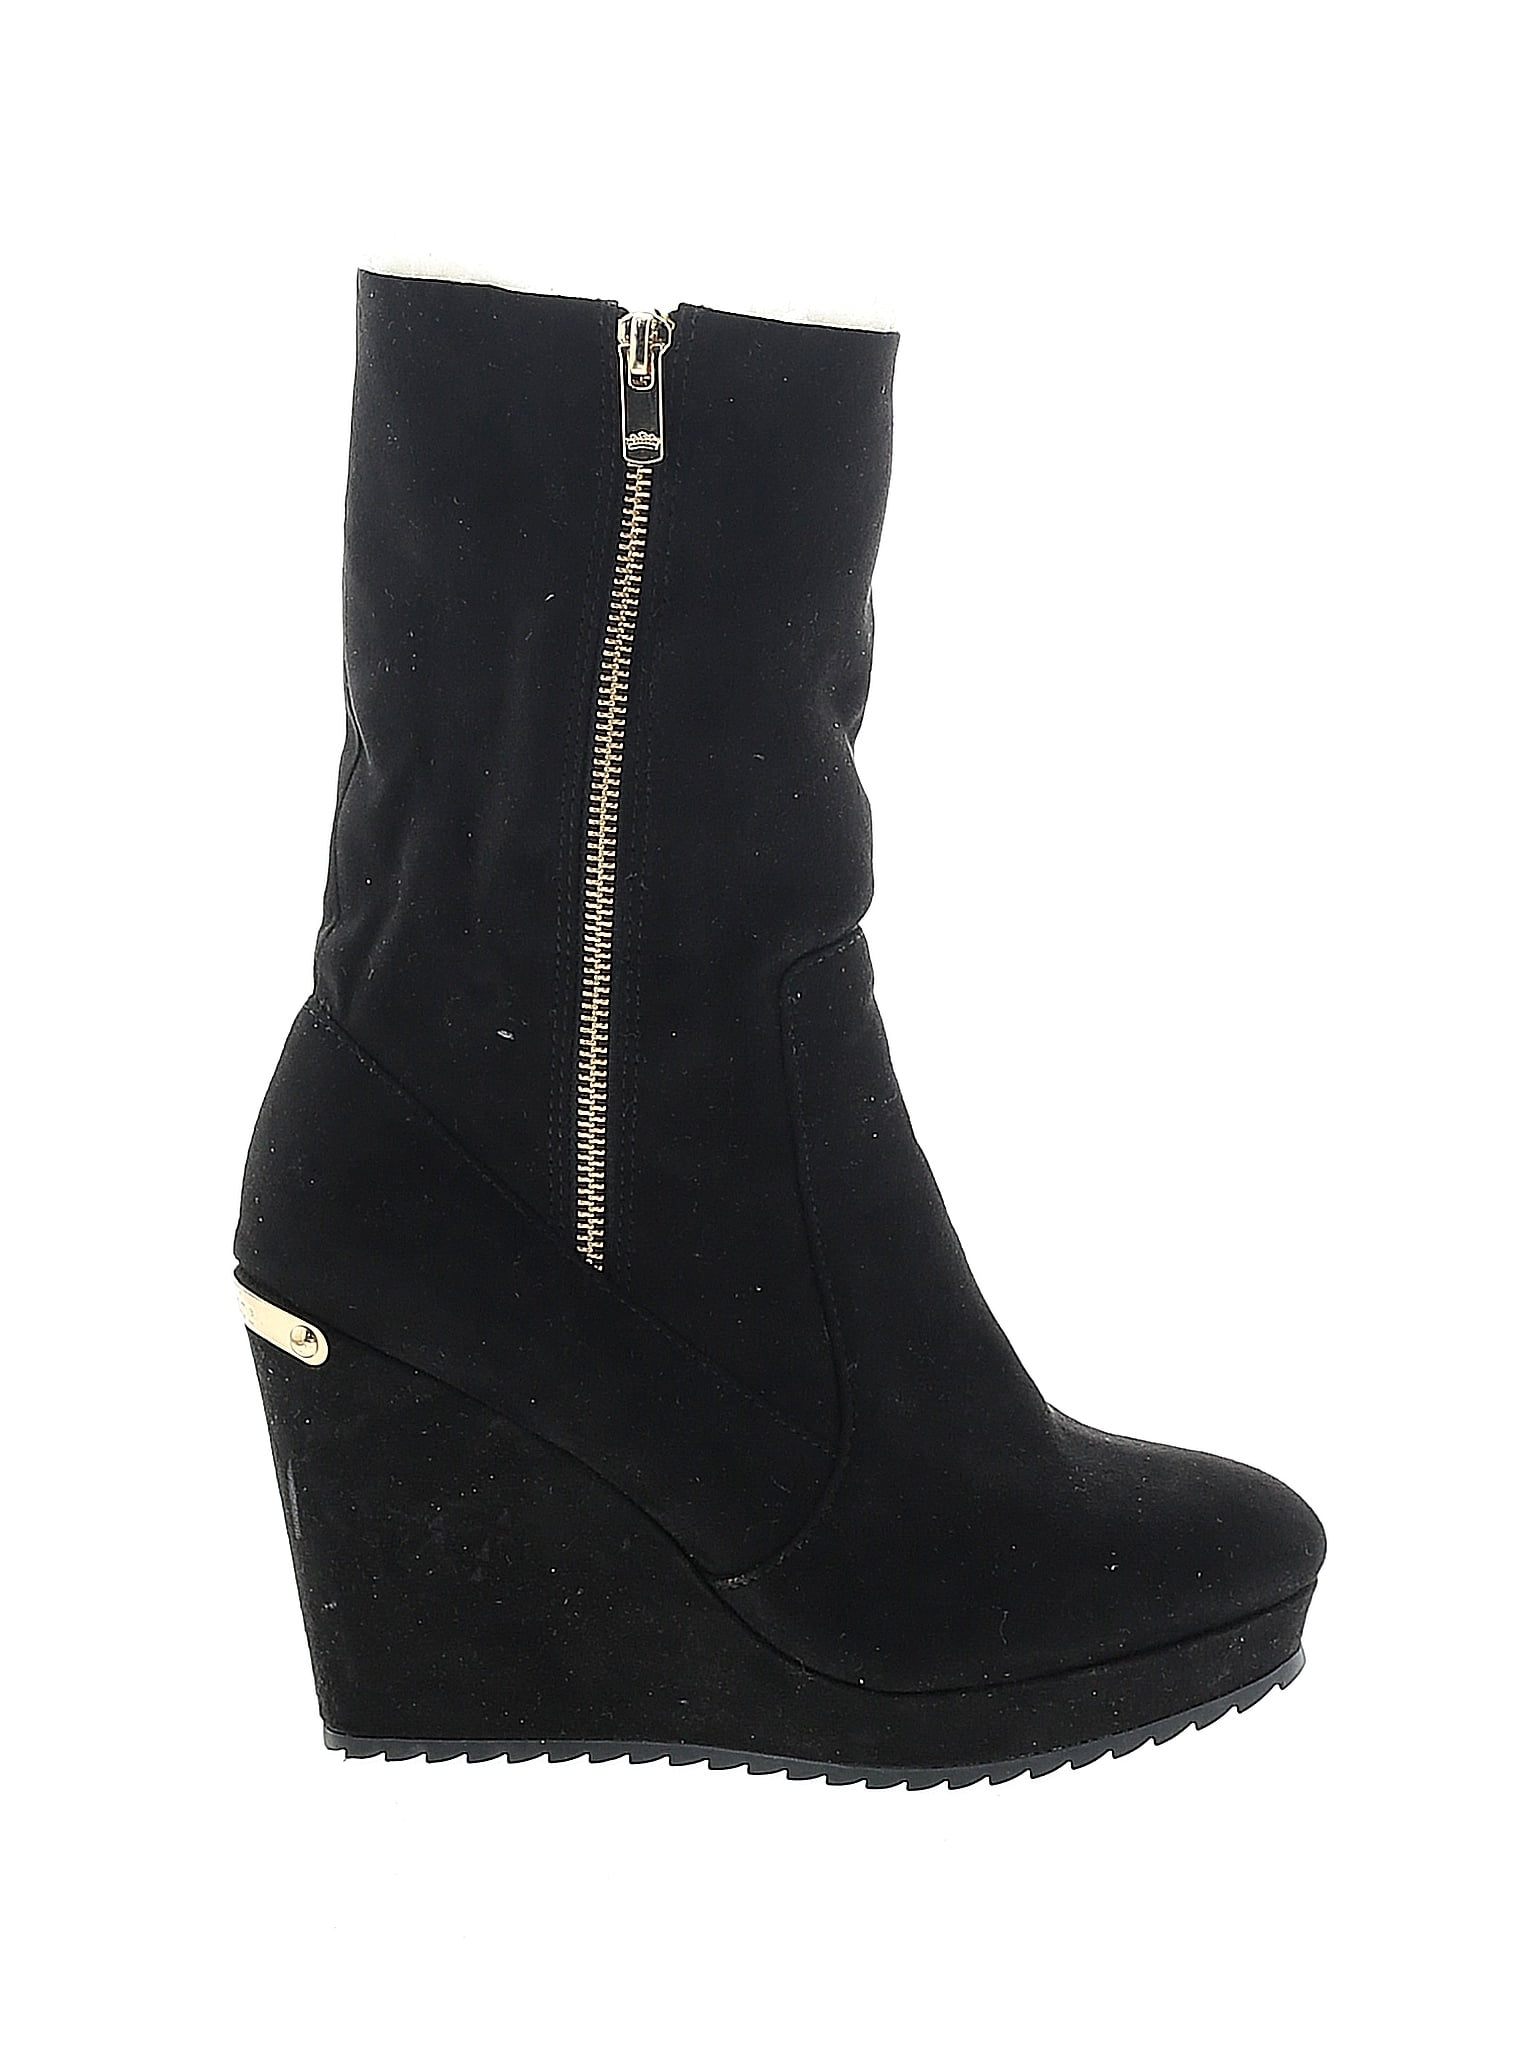 Juicy Couture Black Boots Size 7 1/2 - 72% off | thredUP